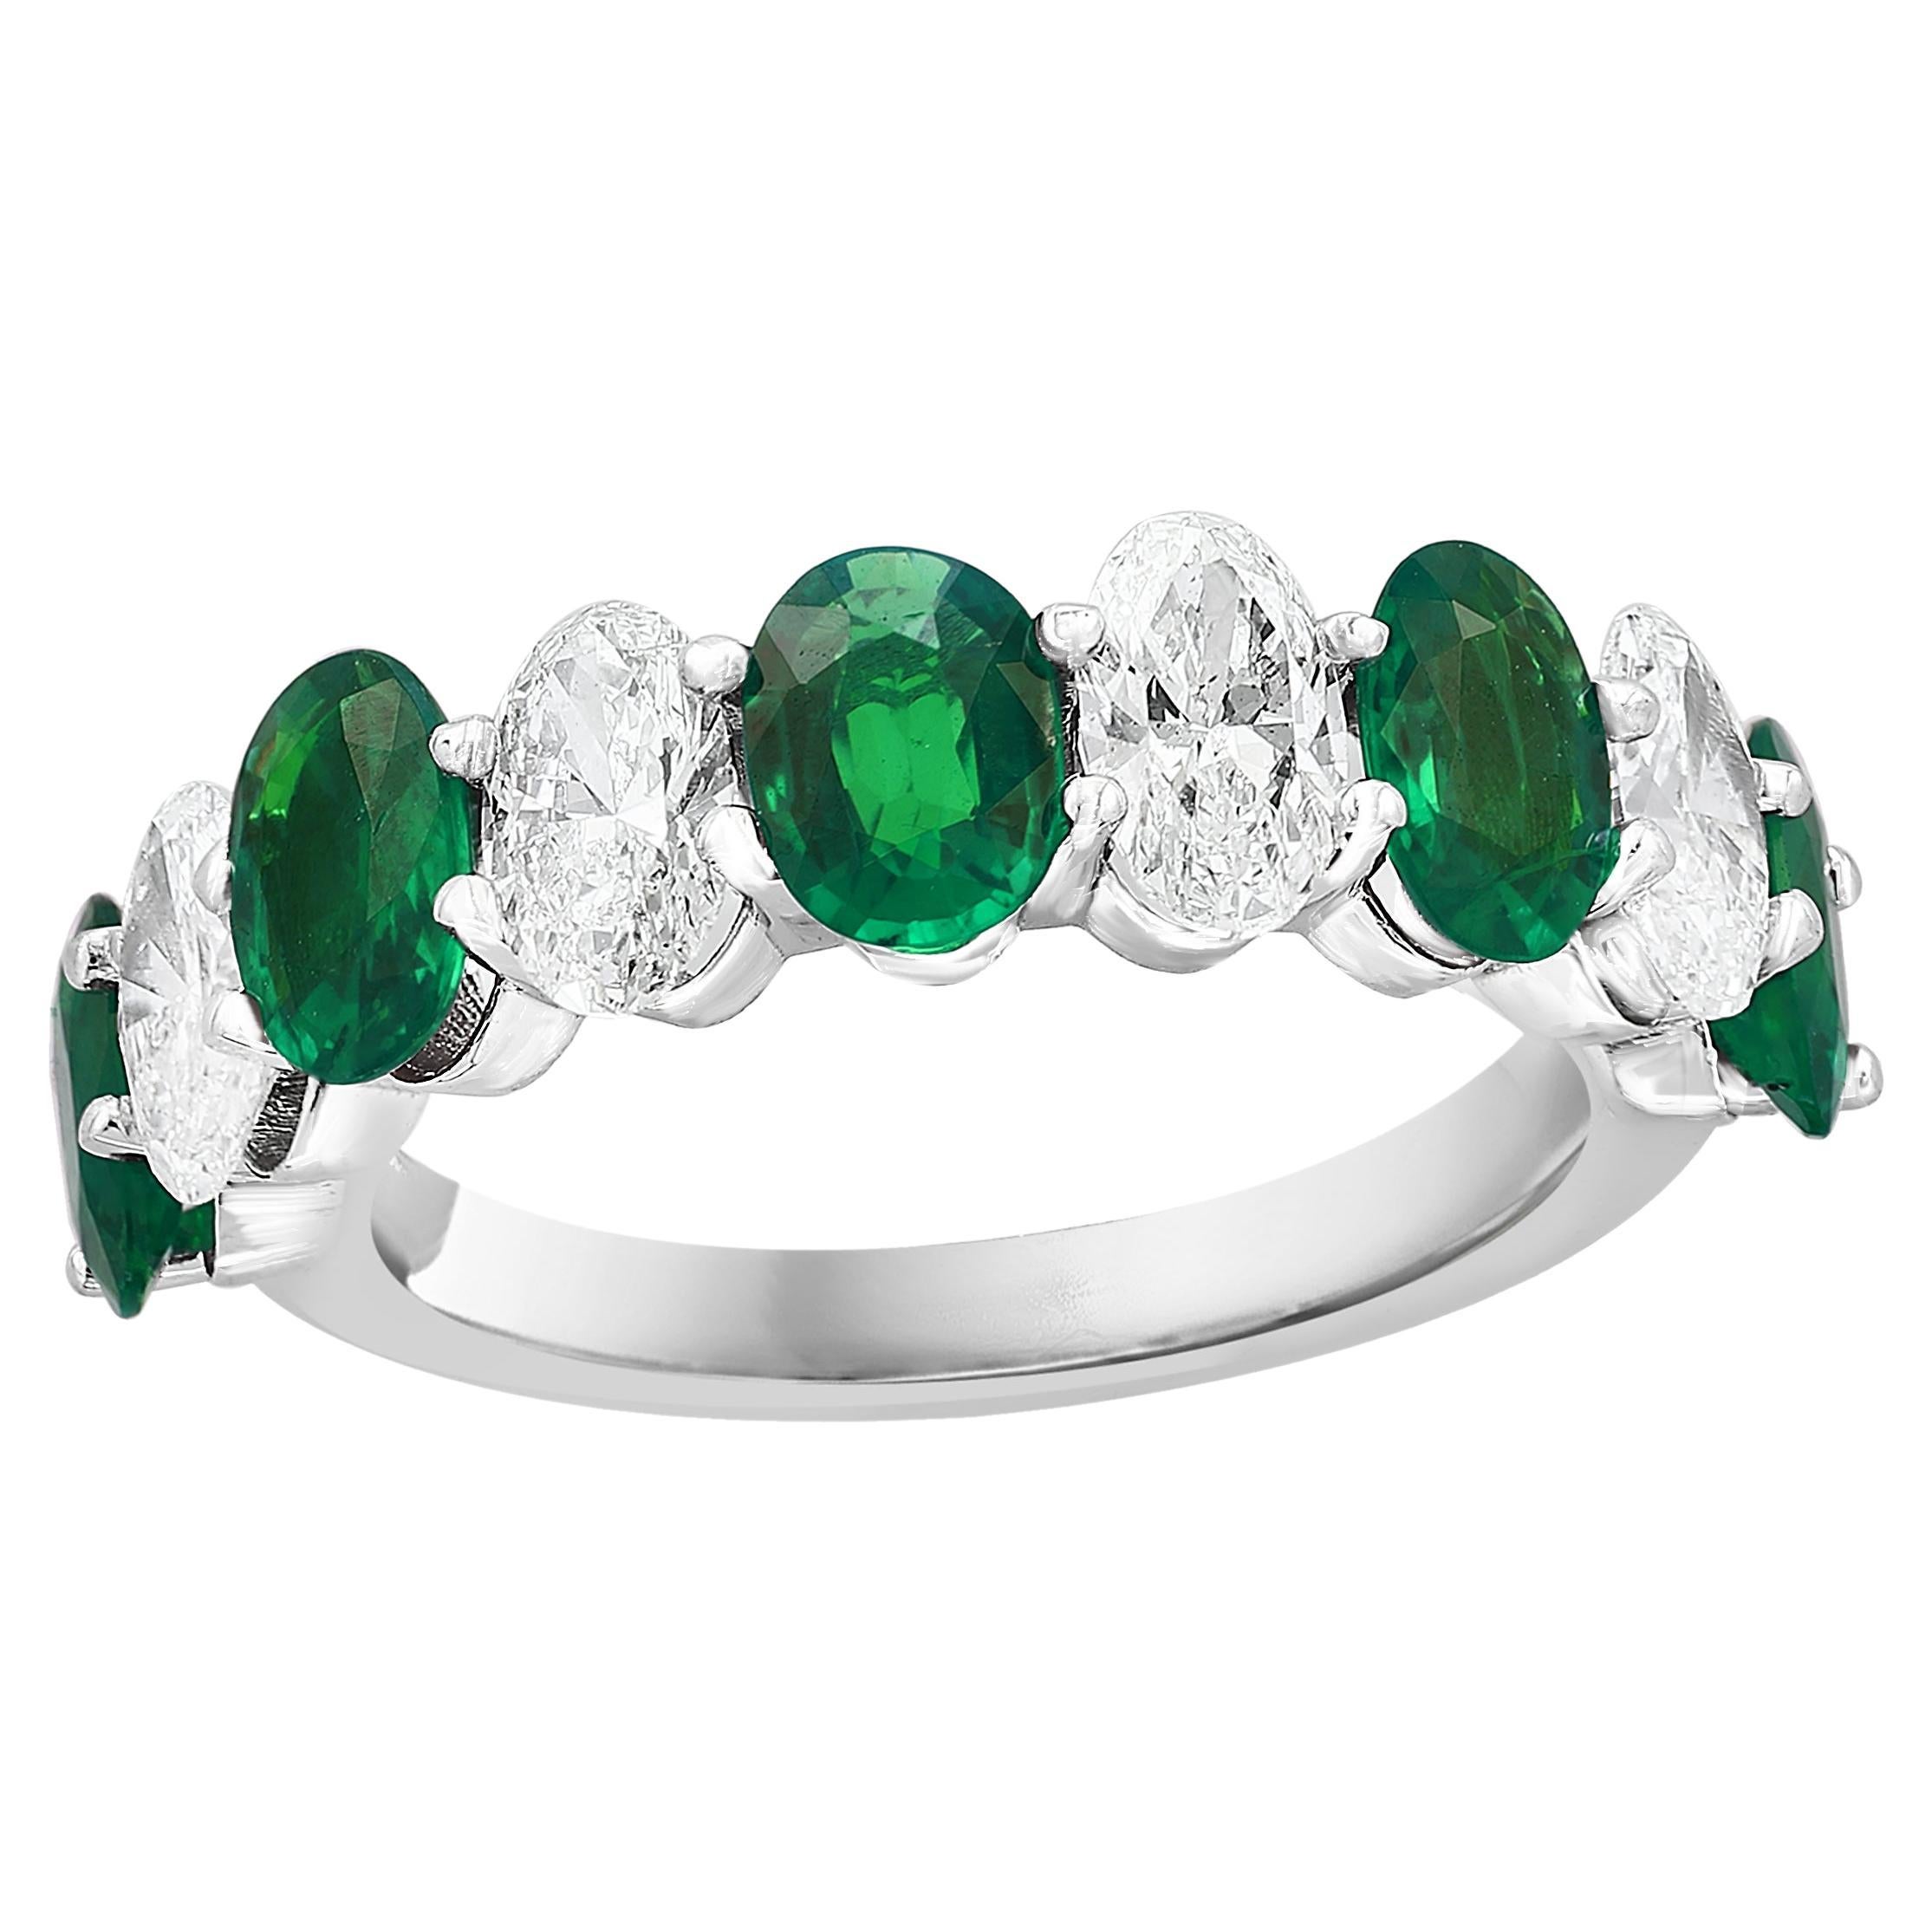 1.89 carat Oval Cut Emerald Diamond Eternity Wedding Band in 14K White Gold For Sale